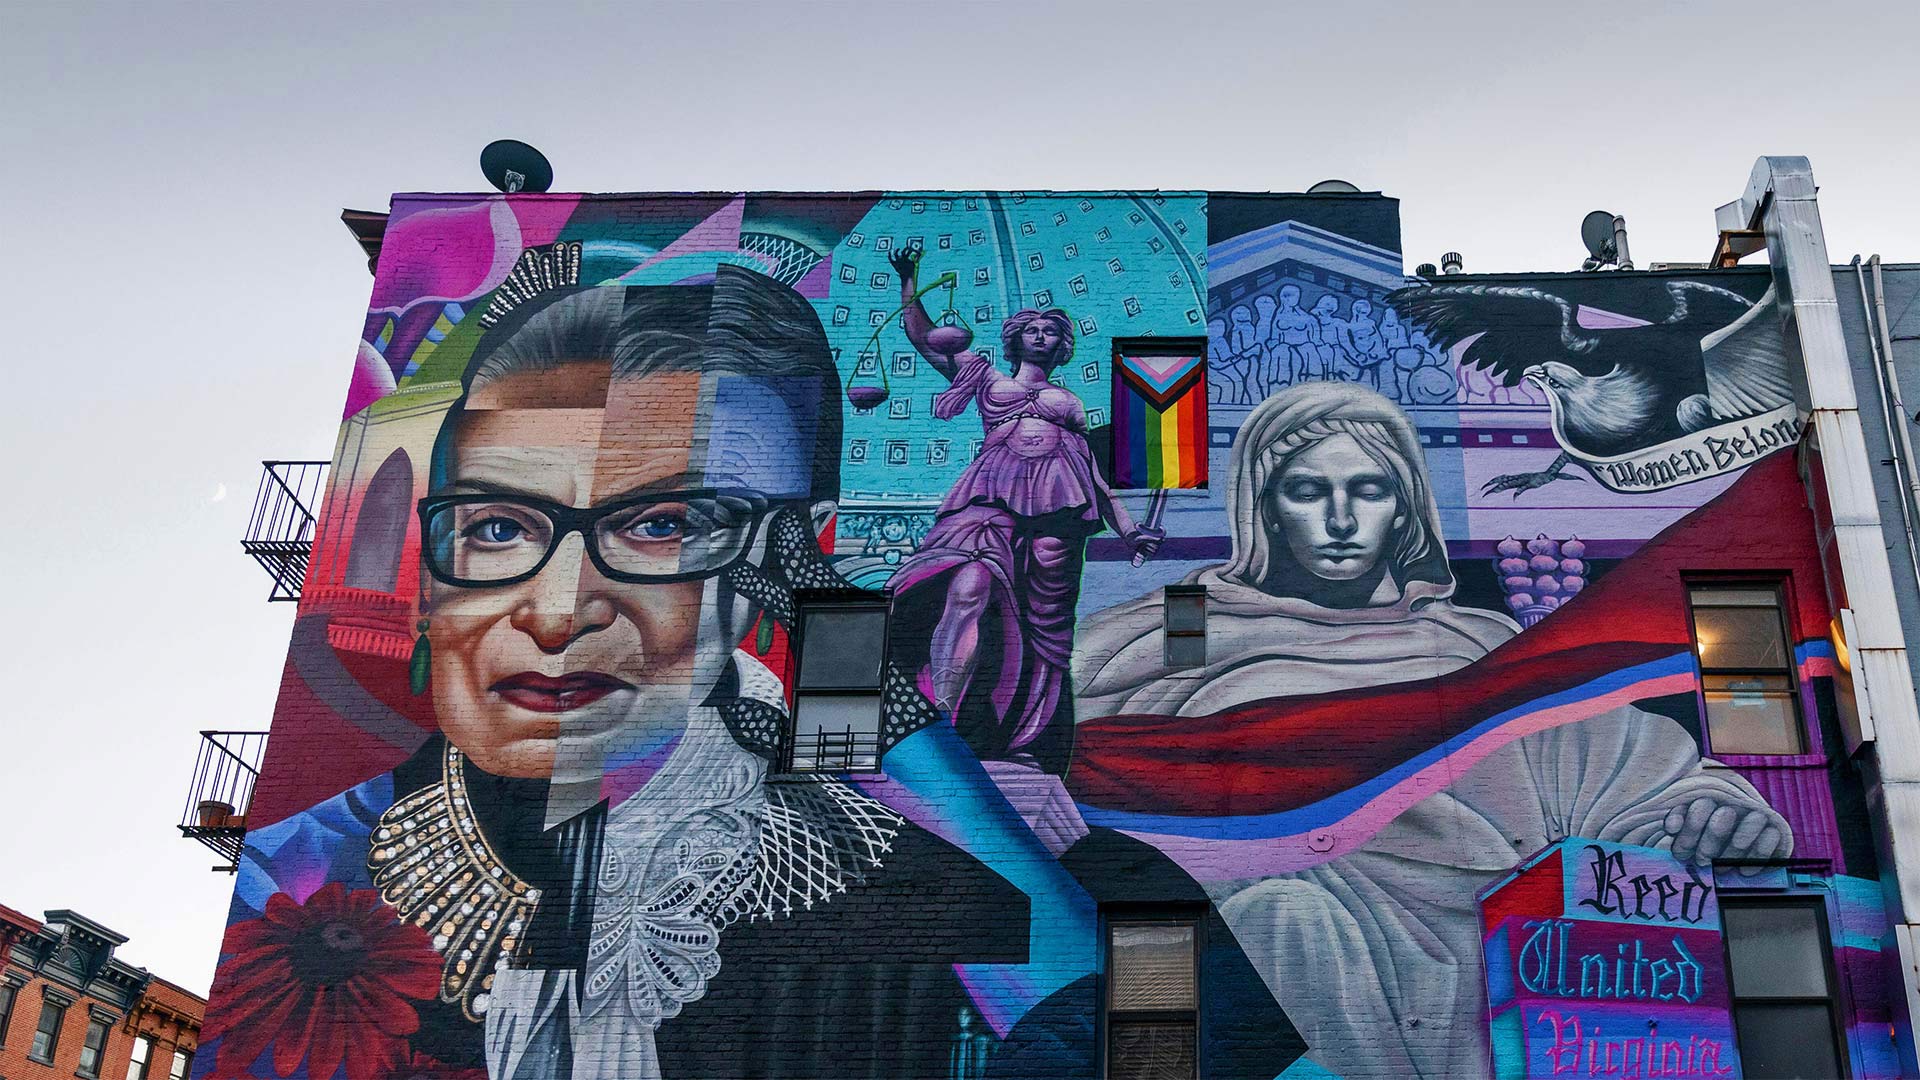 View of the Notorious RBG mural by the street artist Elle in New York City - lev radin/Alamy)